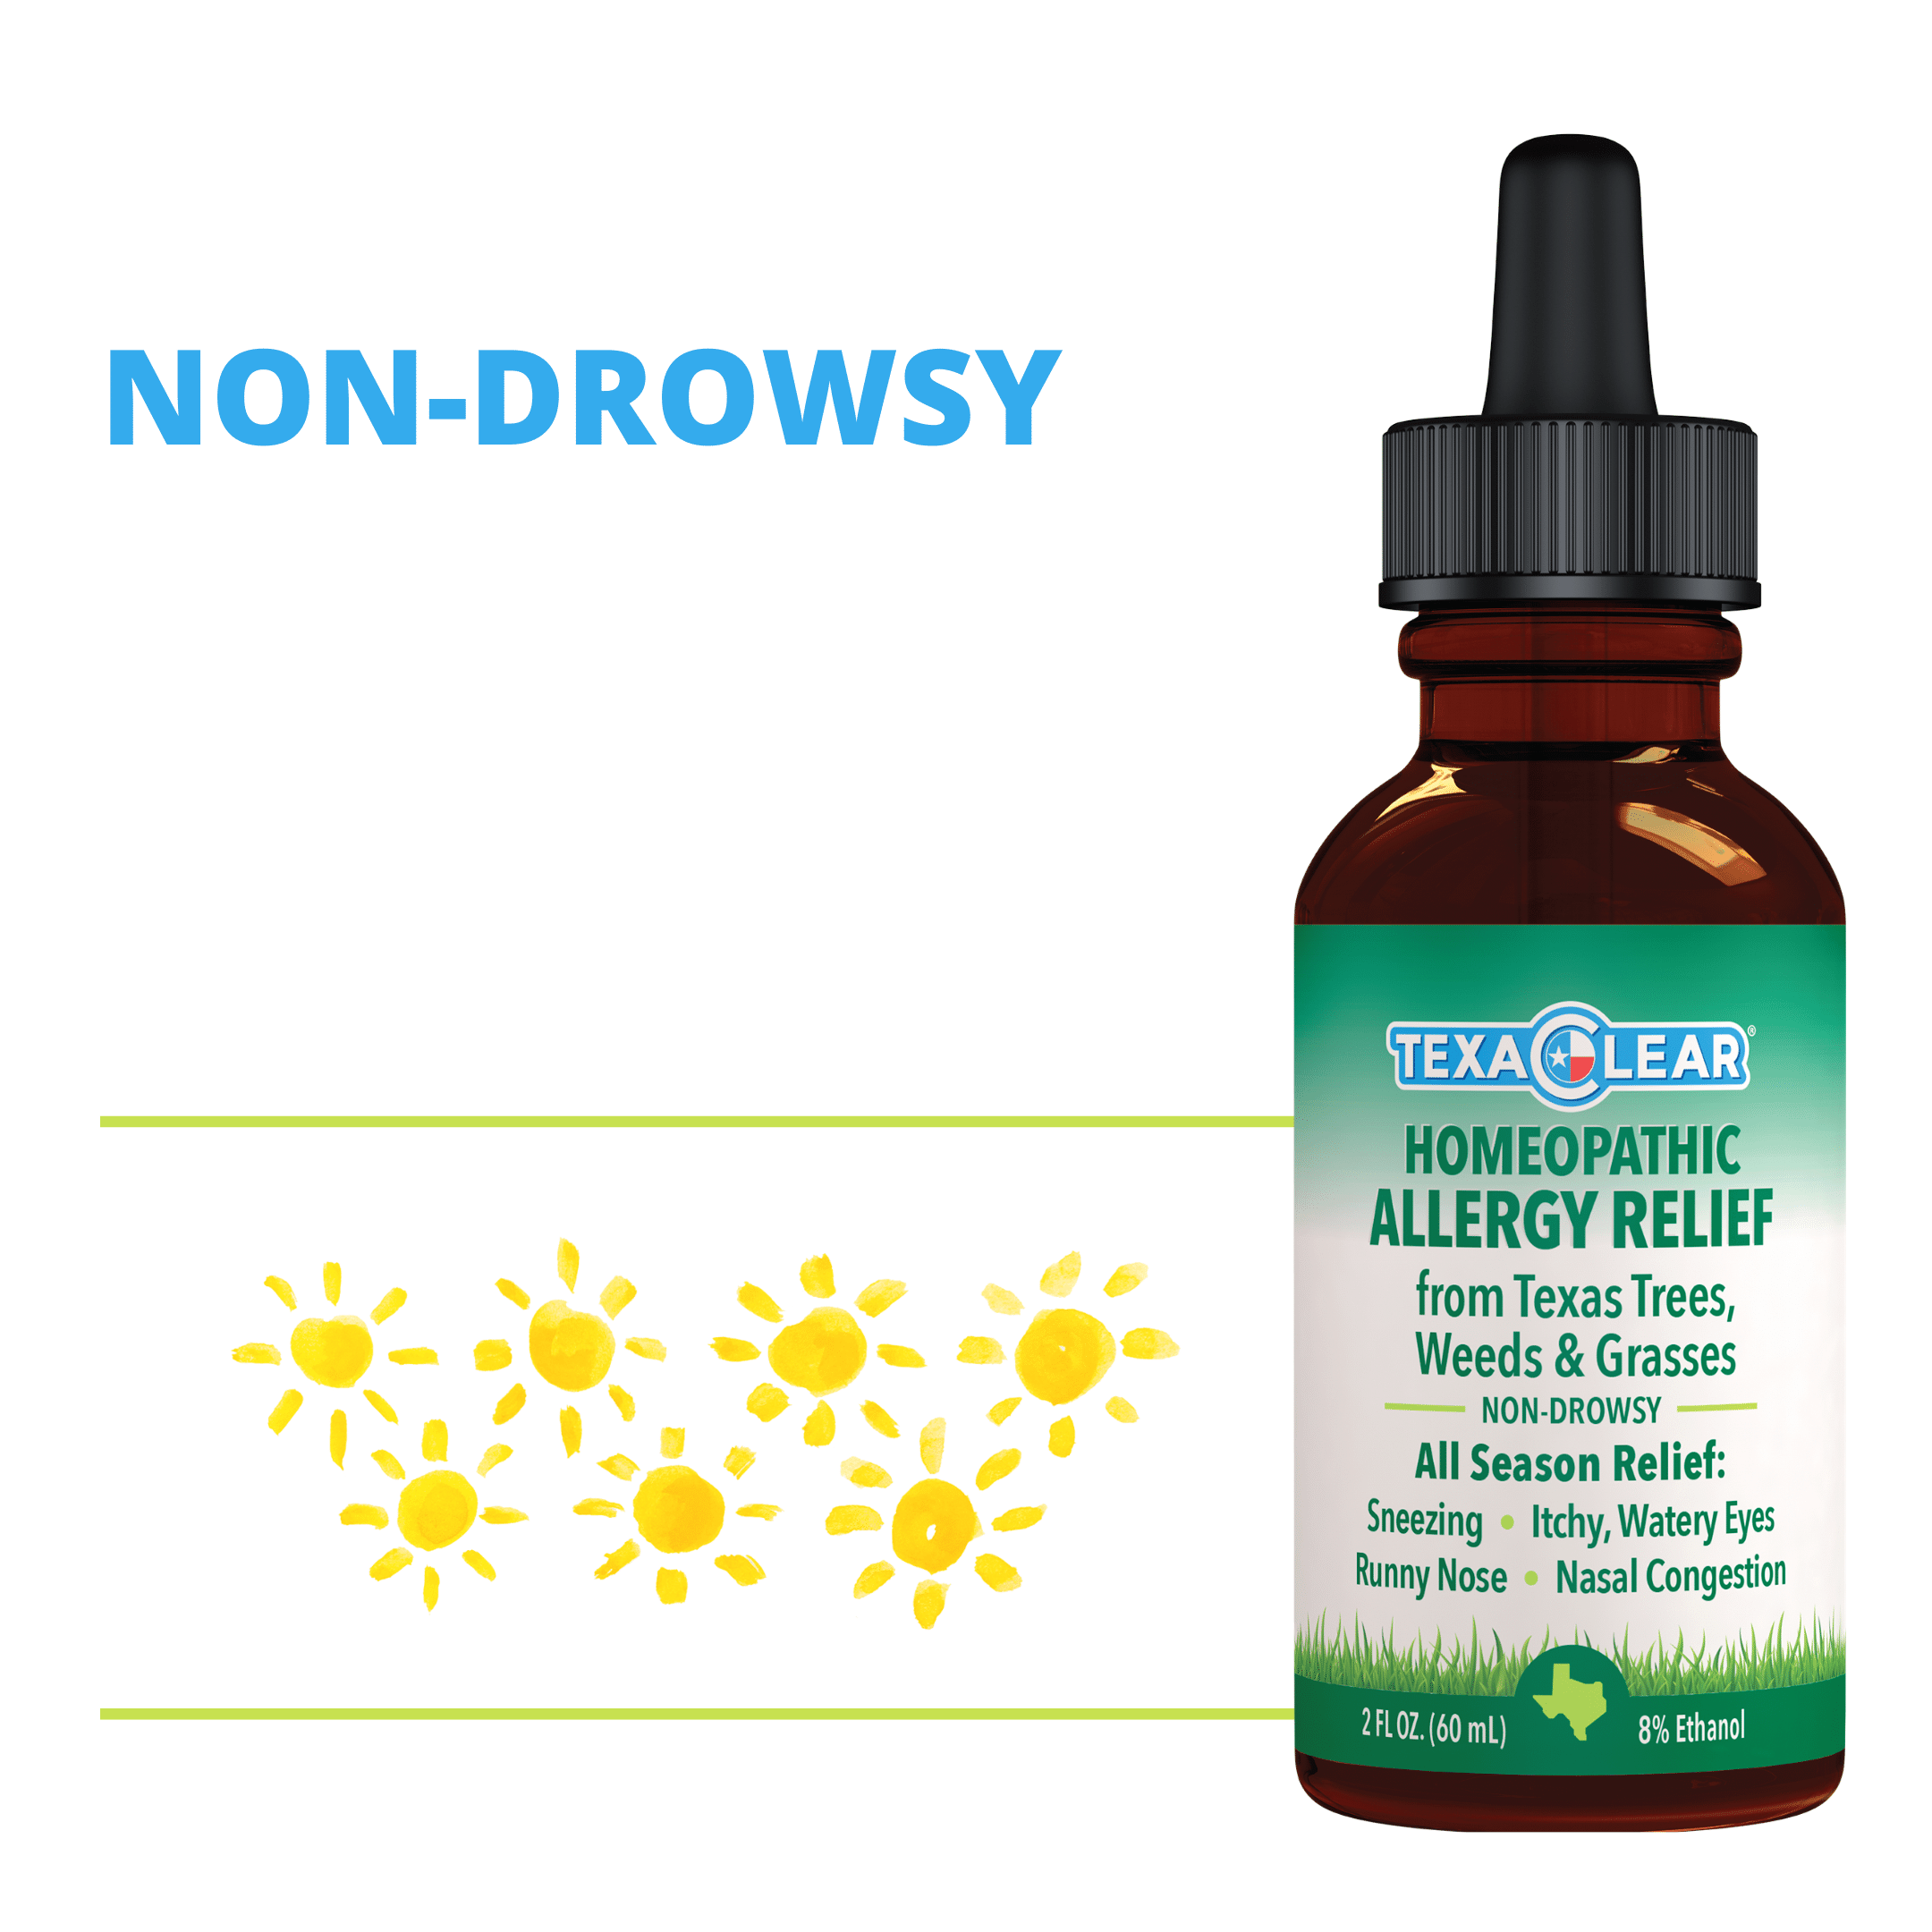 TexaClear Homeopathic Allergy Relief Drops are a safe and effective solution for Texas allergy relief and is non-drowsy.